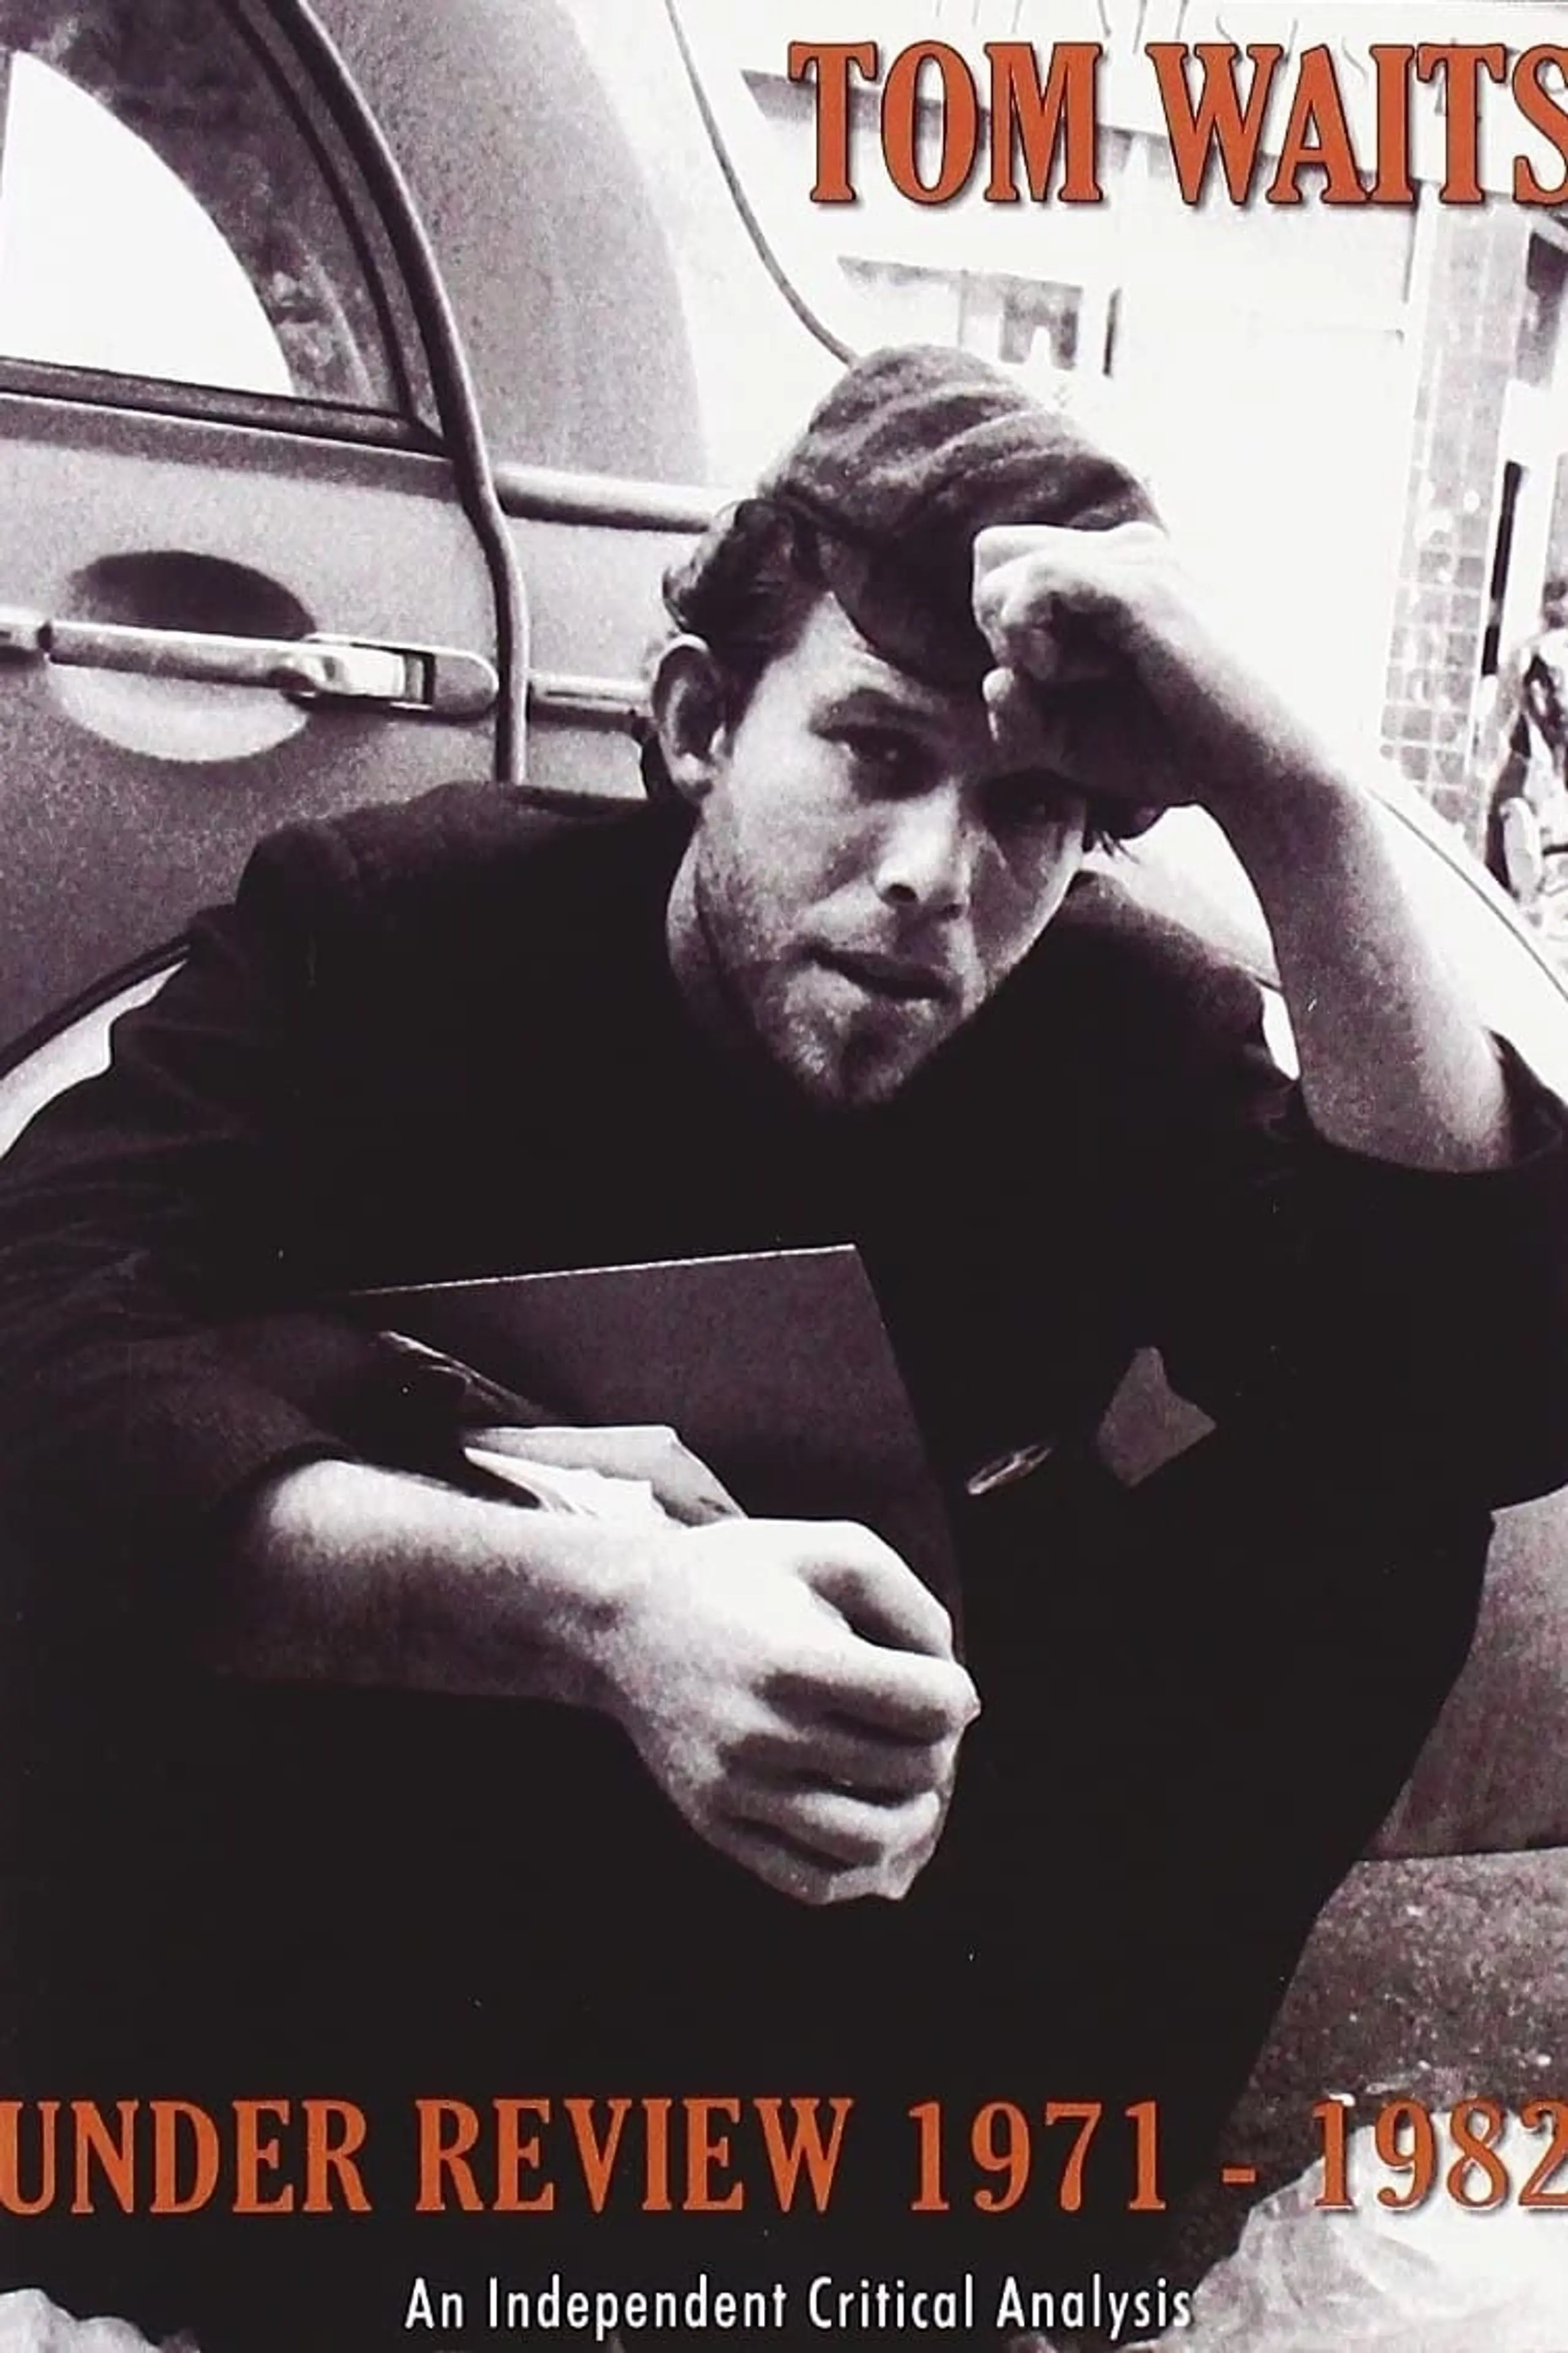 Tom Waits Under Review 1971-1982